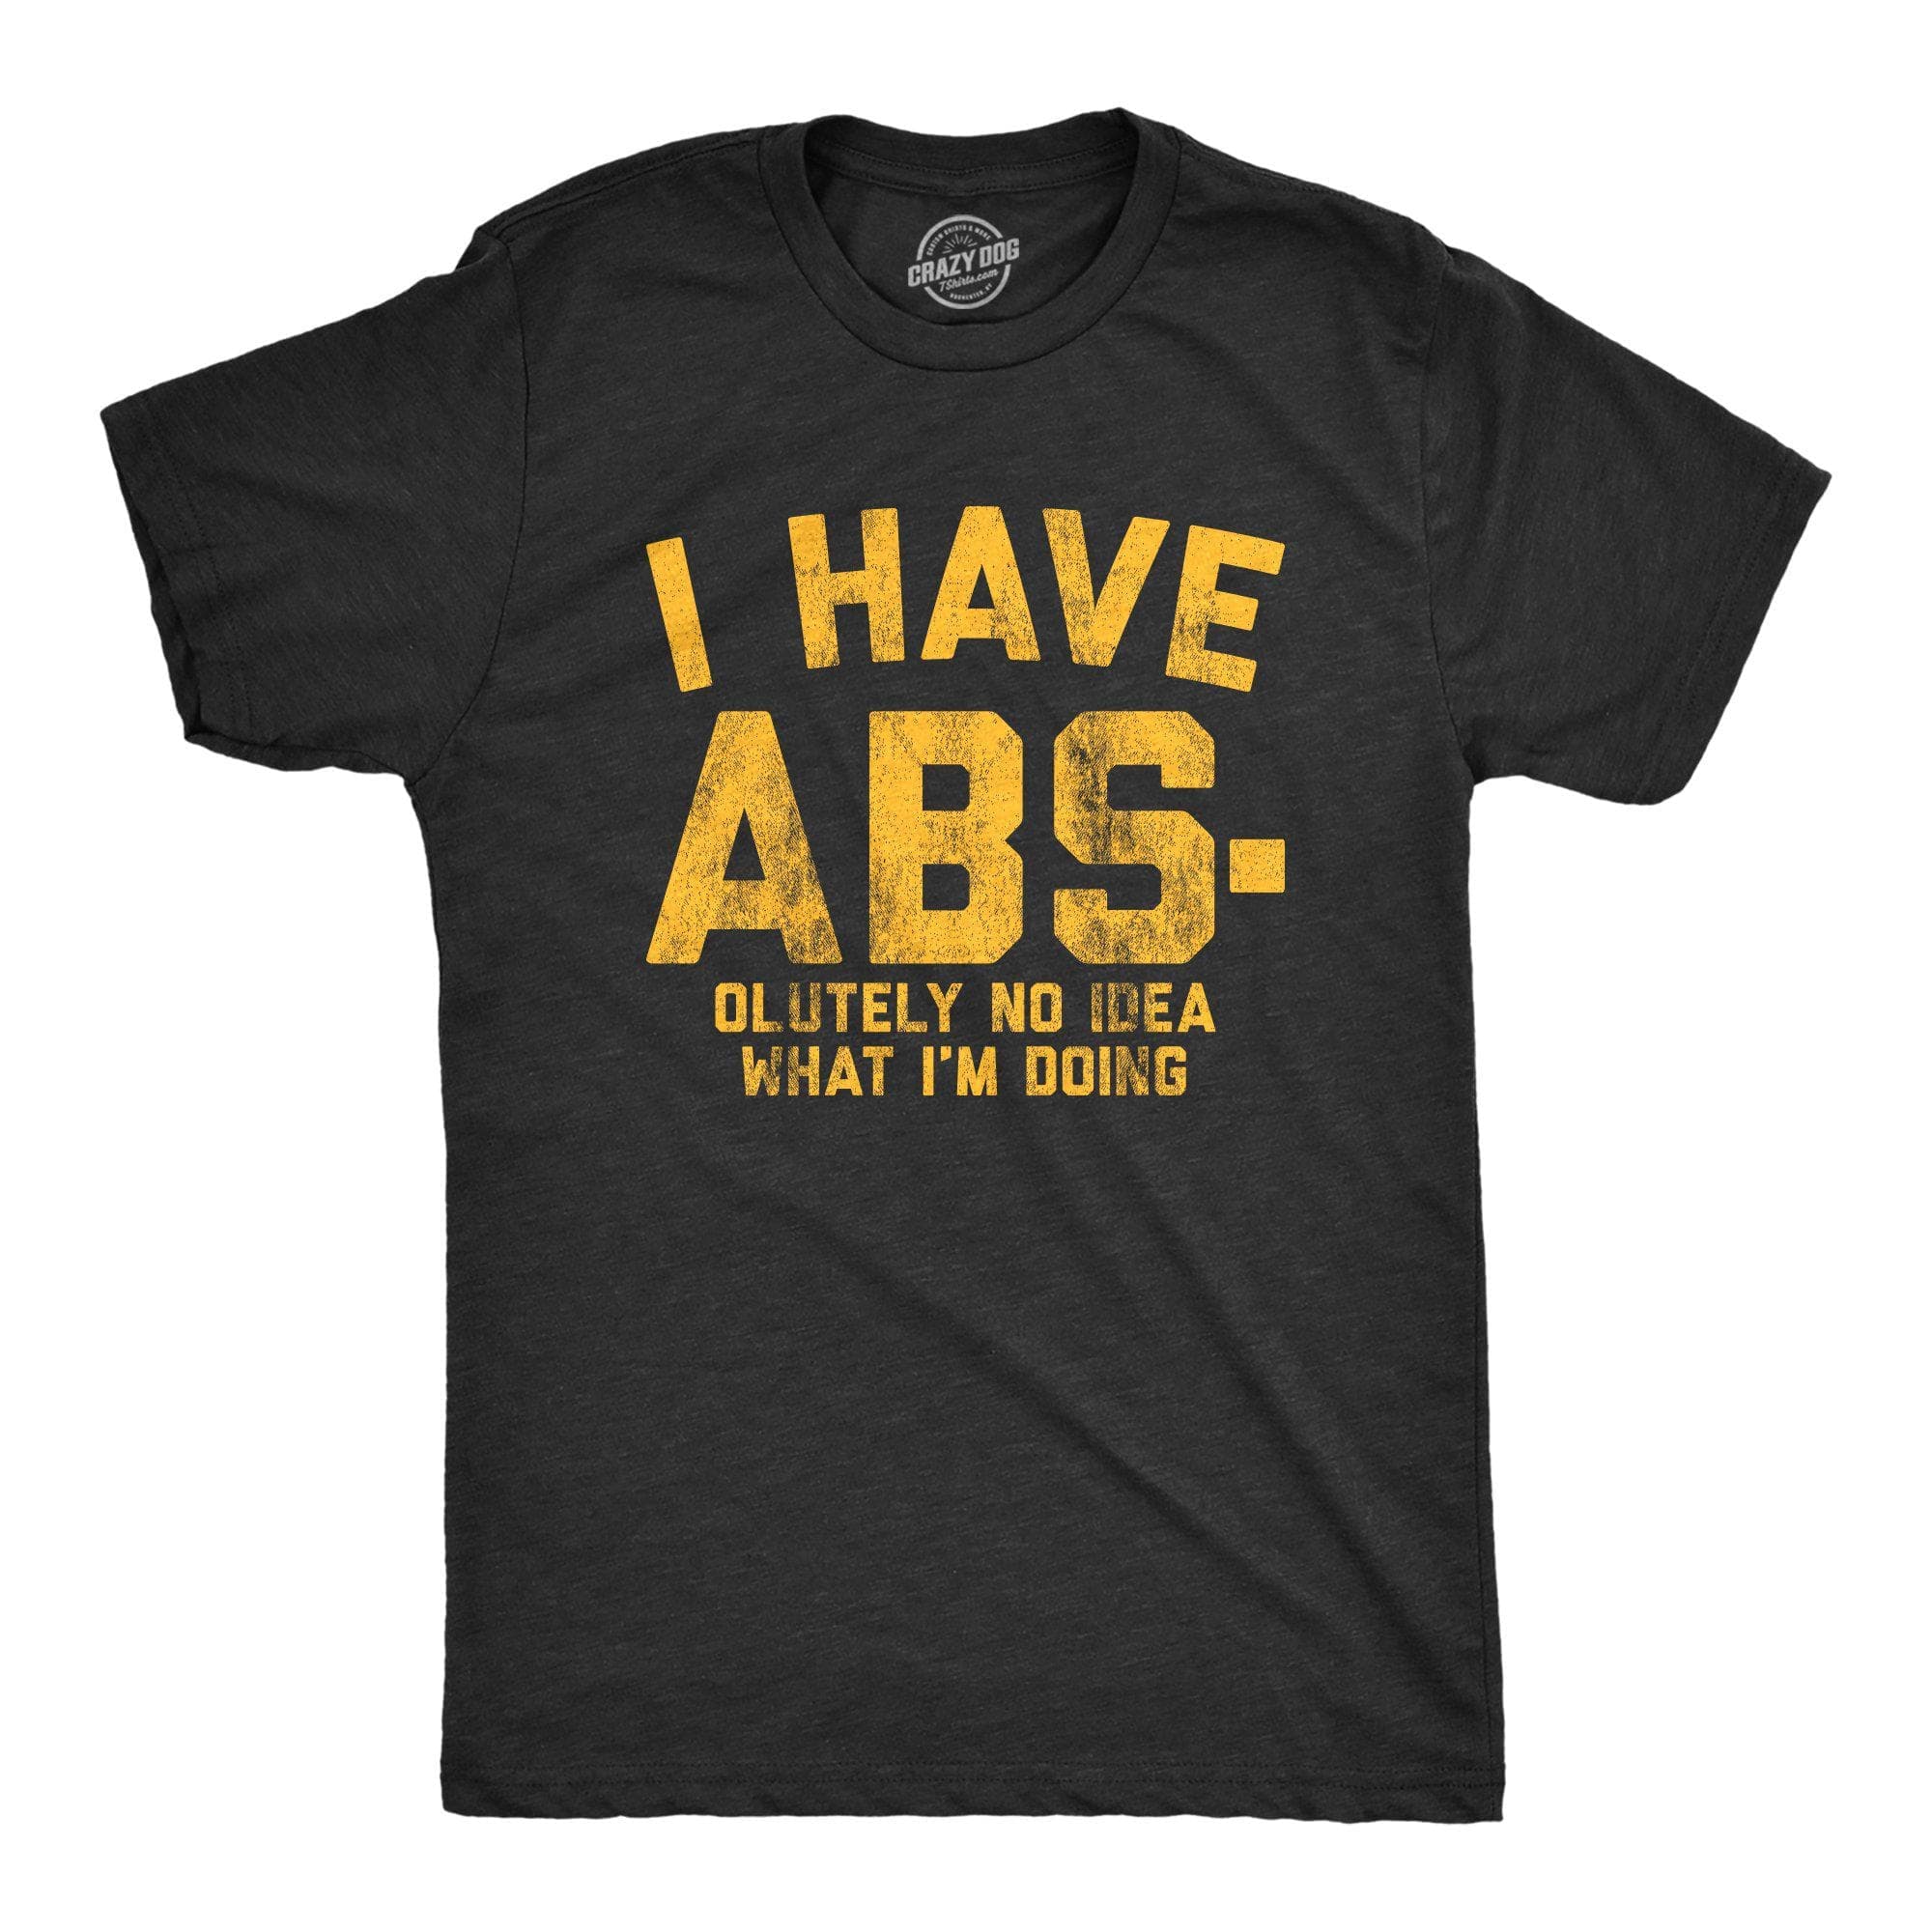 I Have Abs-olutely No Idea What I'm Doing Men's Tshirt - Crazy Dog T-Shirts